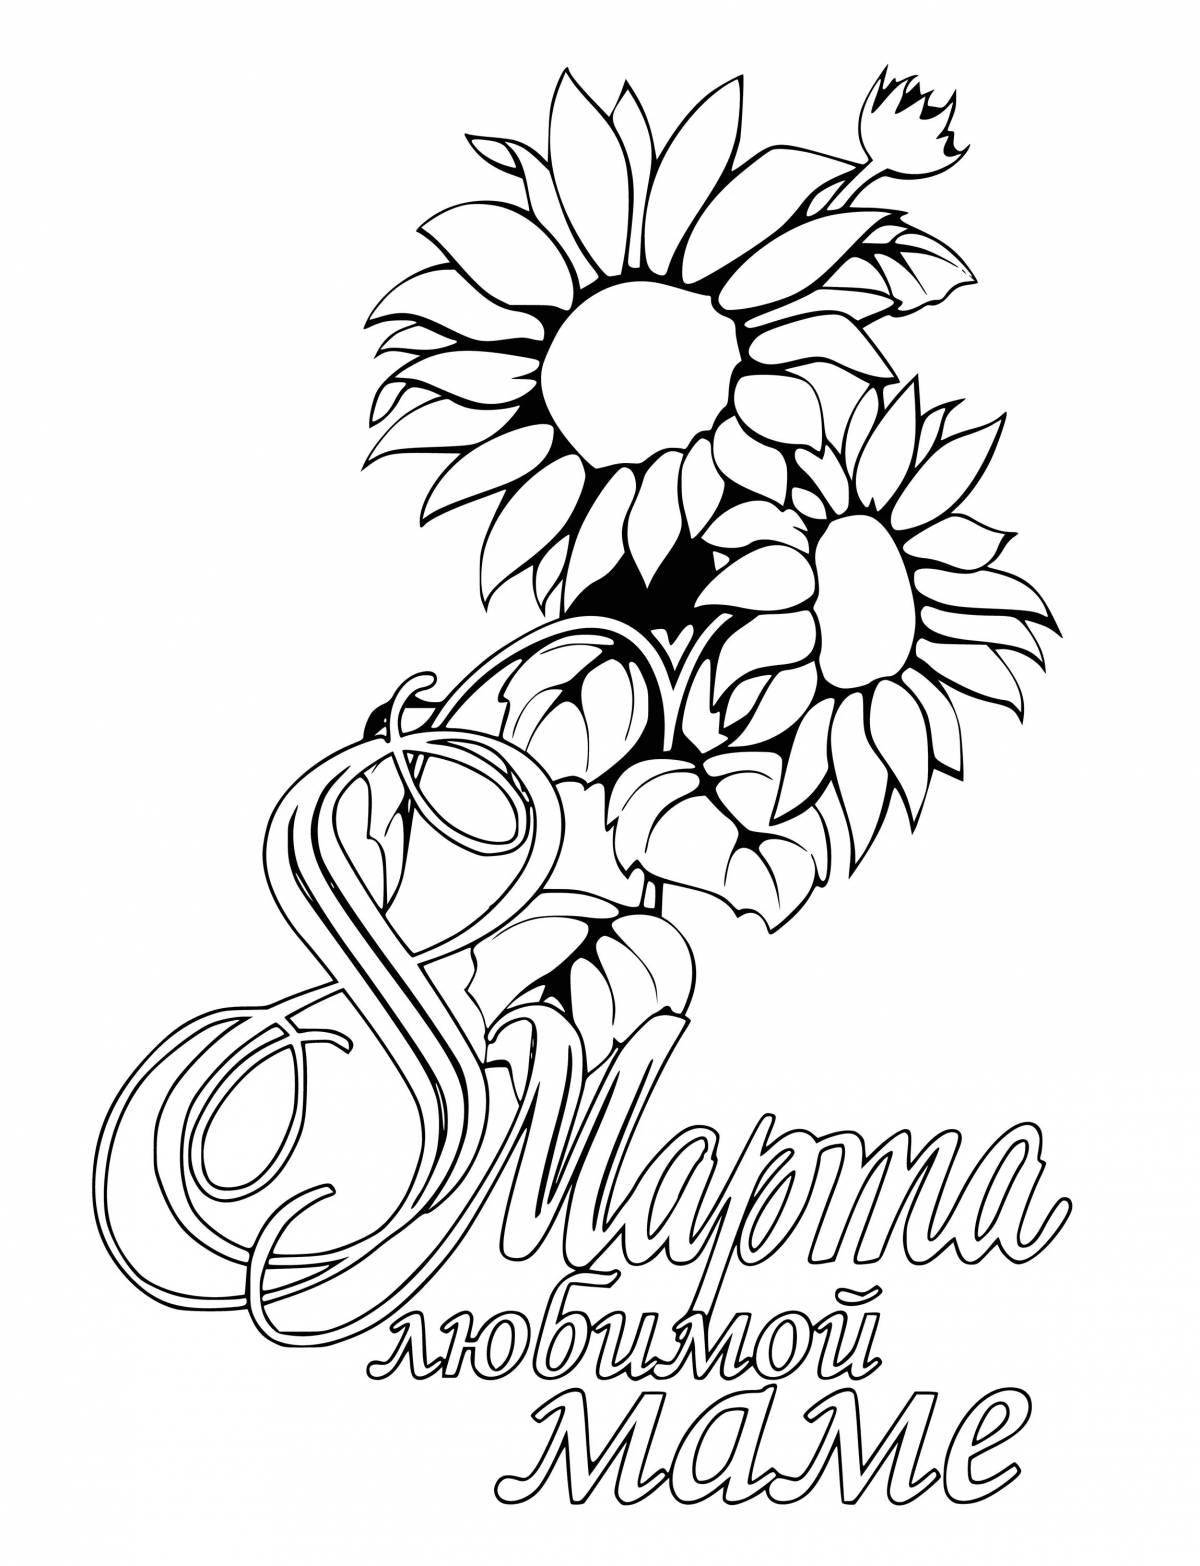 Live mom March 8 coloring